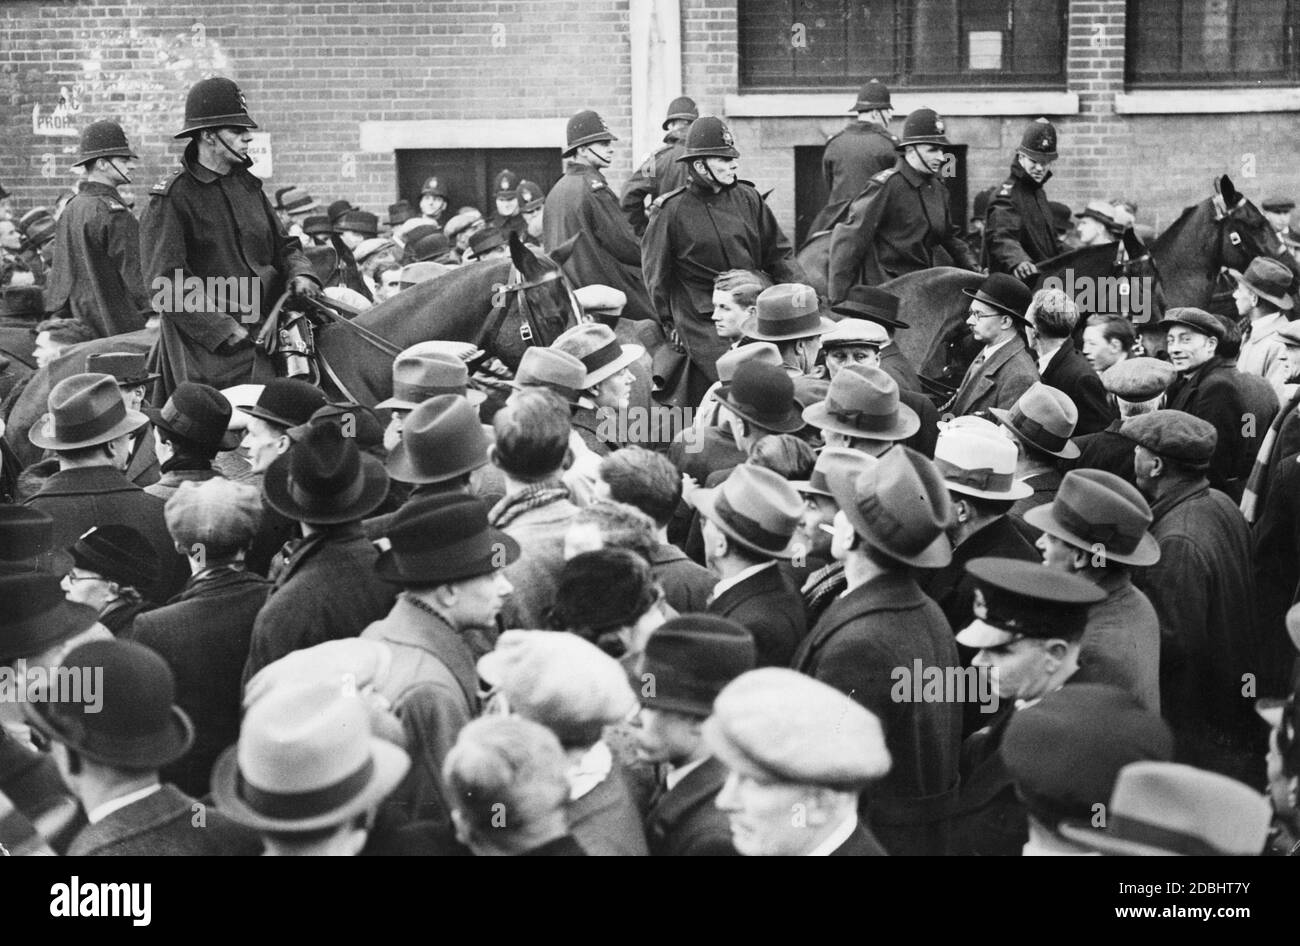 Mounted policemen control a crowd of soccer fans in front of the White Hart Lane soccer stadium in the London district of Tottenham on the occasion of the international soccer game England vs. Germany (3:0). Stock Photo